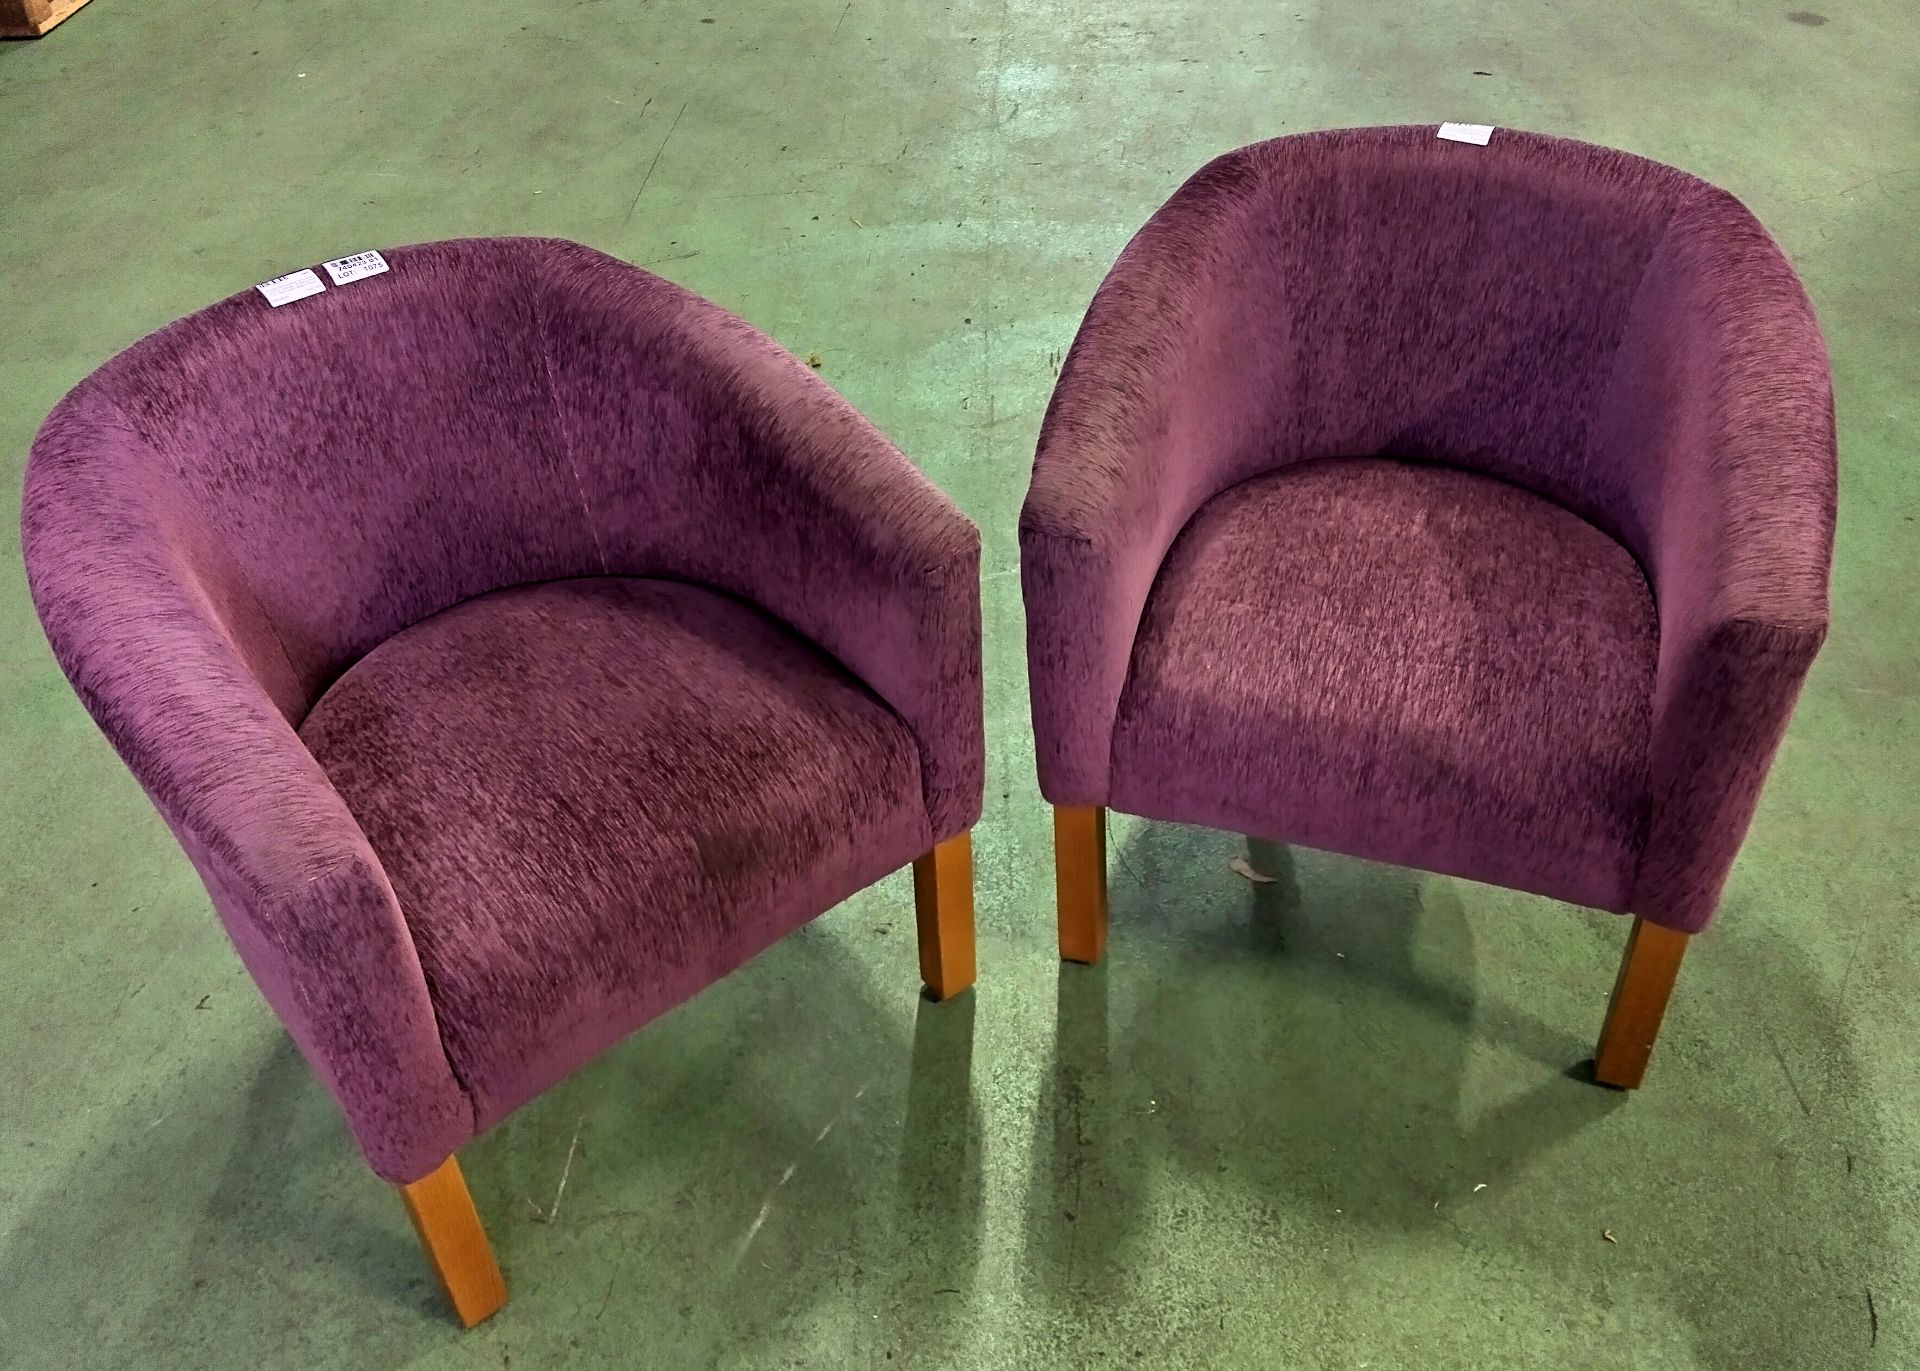 2x Purple upholstered arm chairs - worn in places - W 68 x D 68 x H 70cm Seat height 44cm